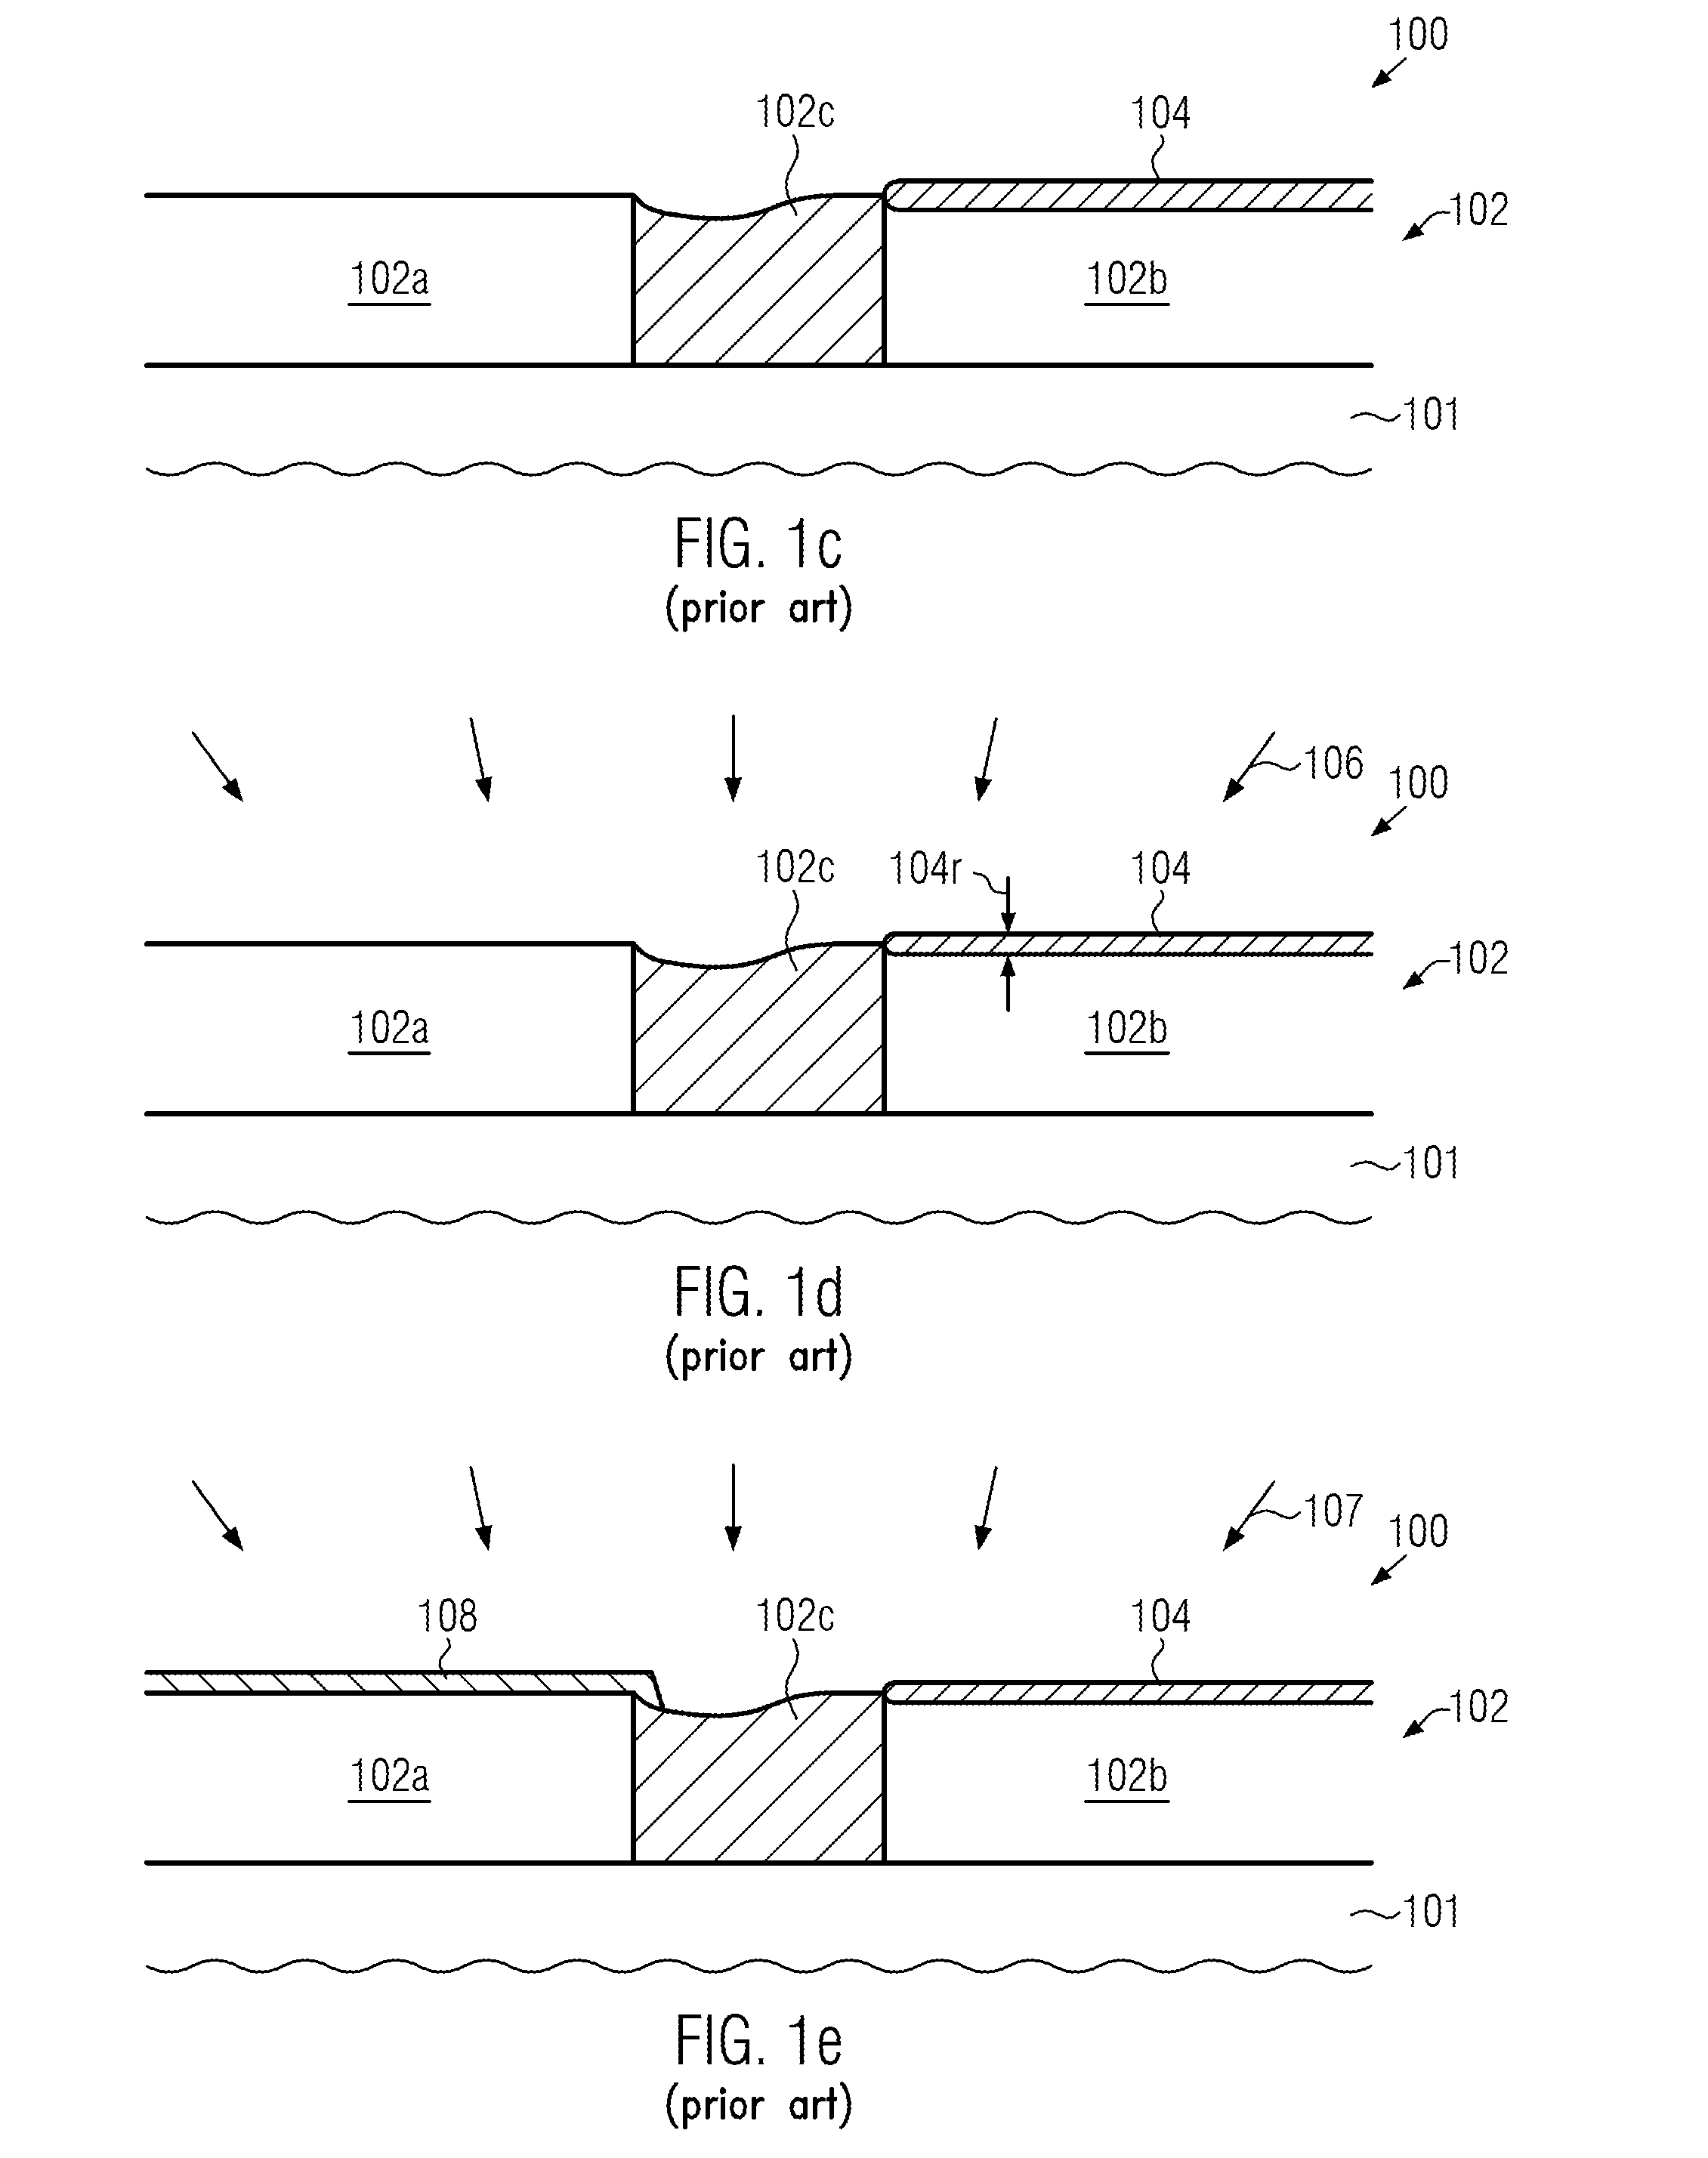 Formation of a channel semiconductor alloy by forming a nitride based hard mask layer